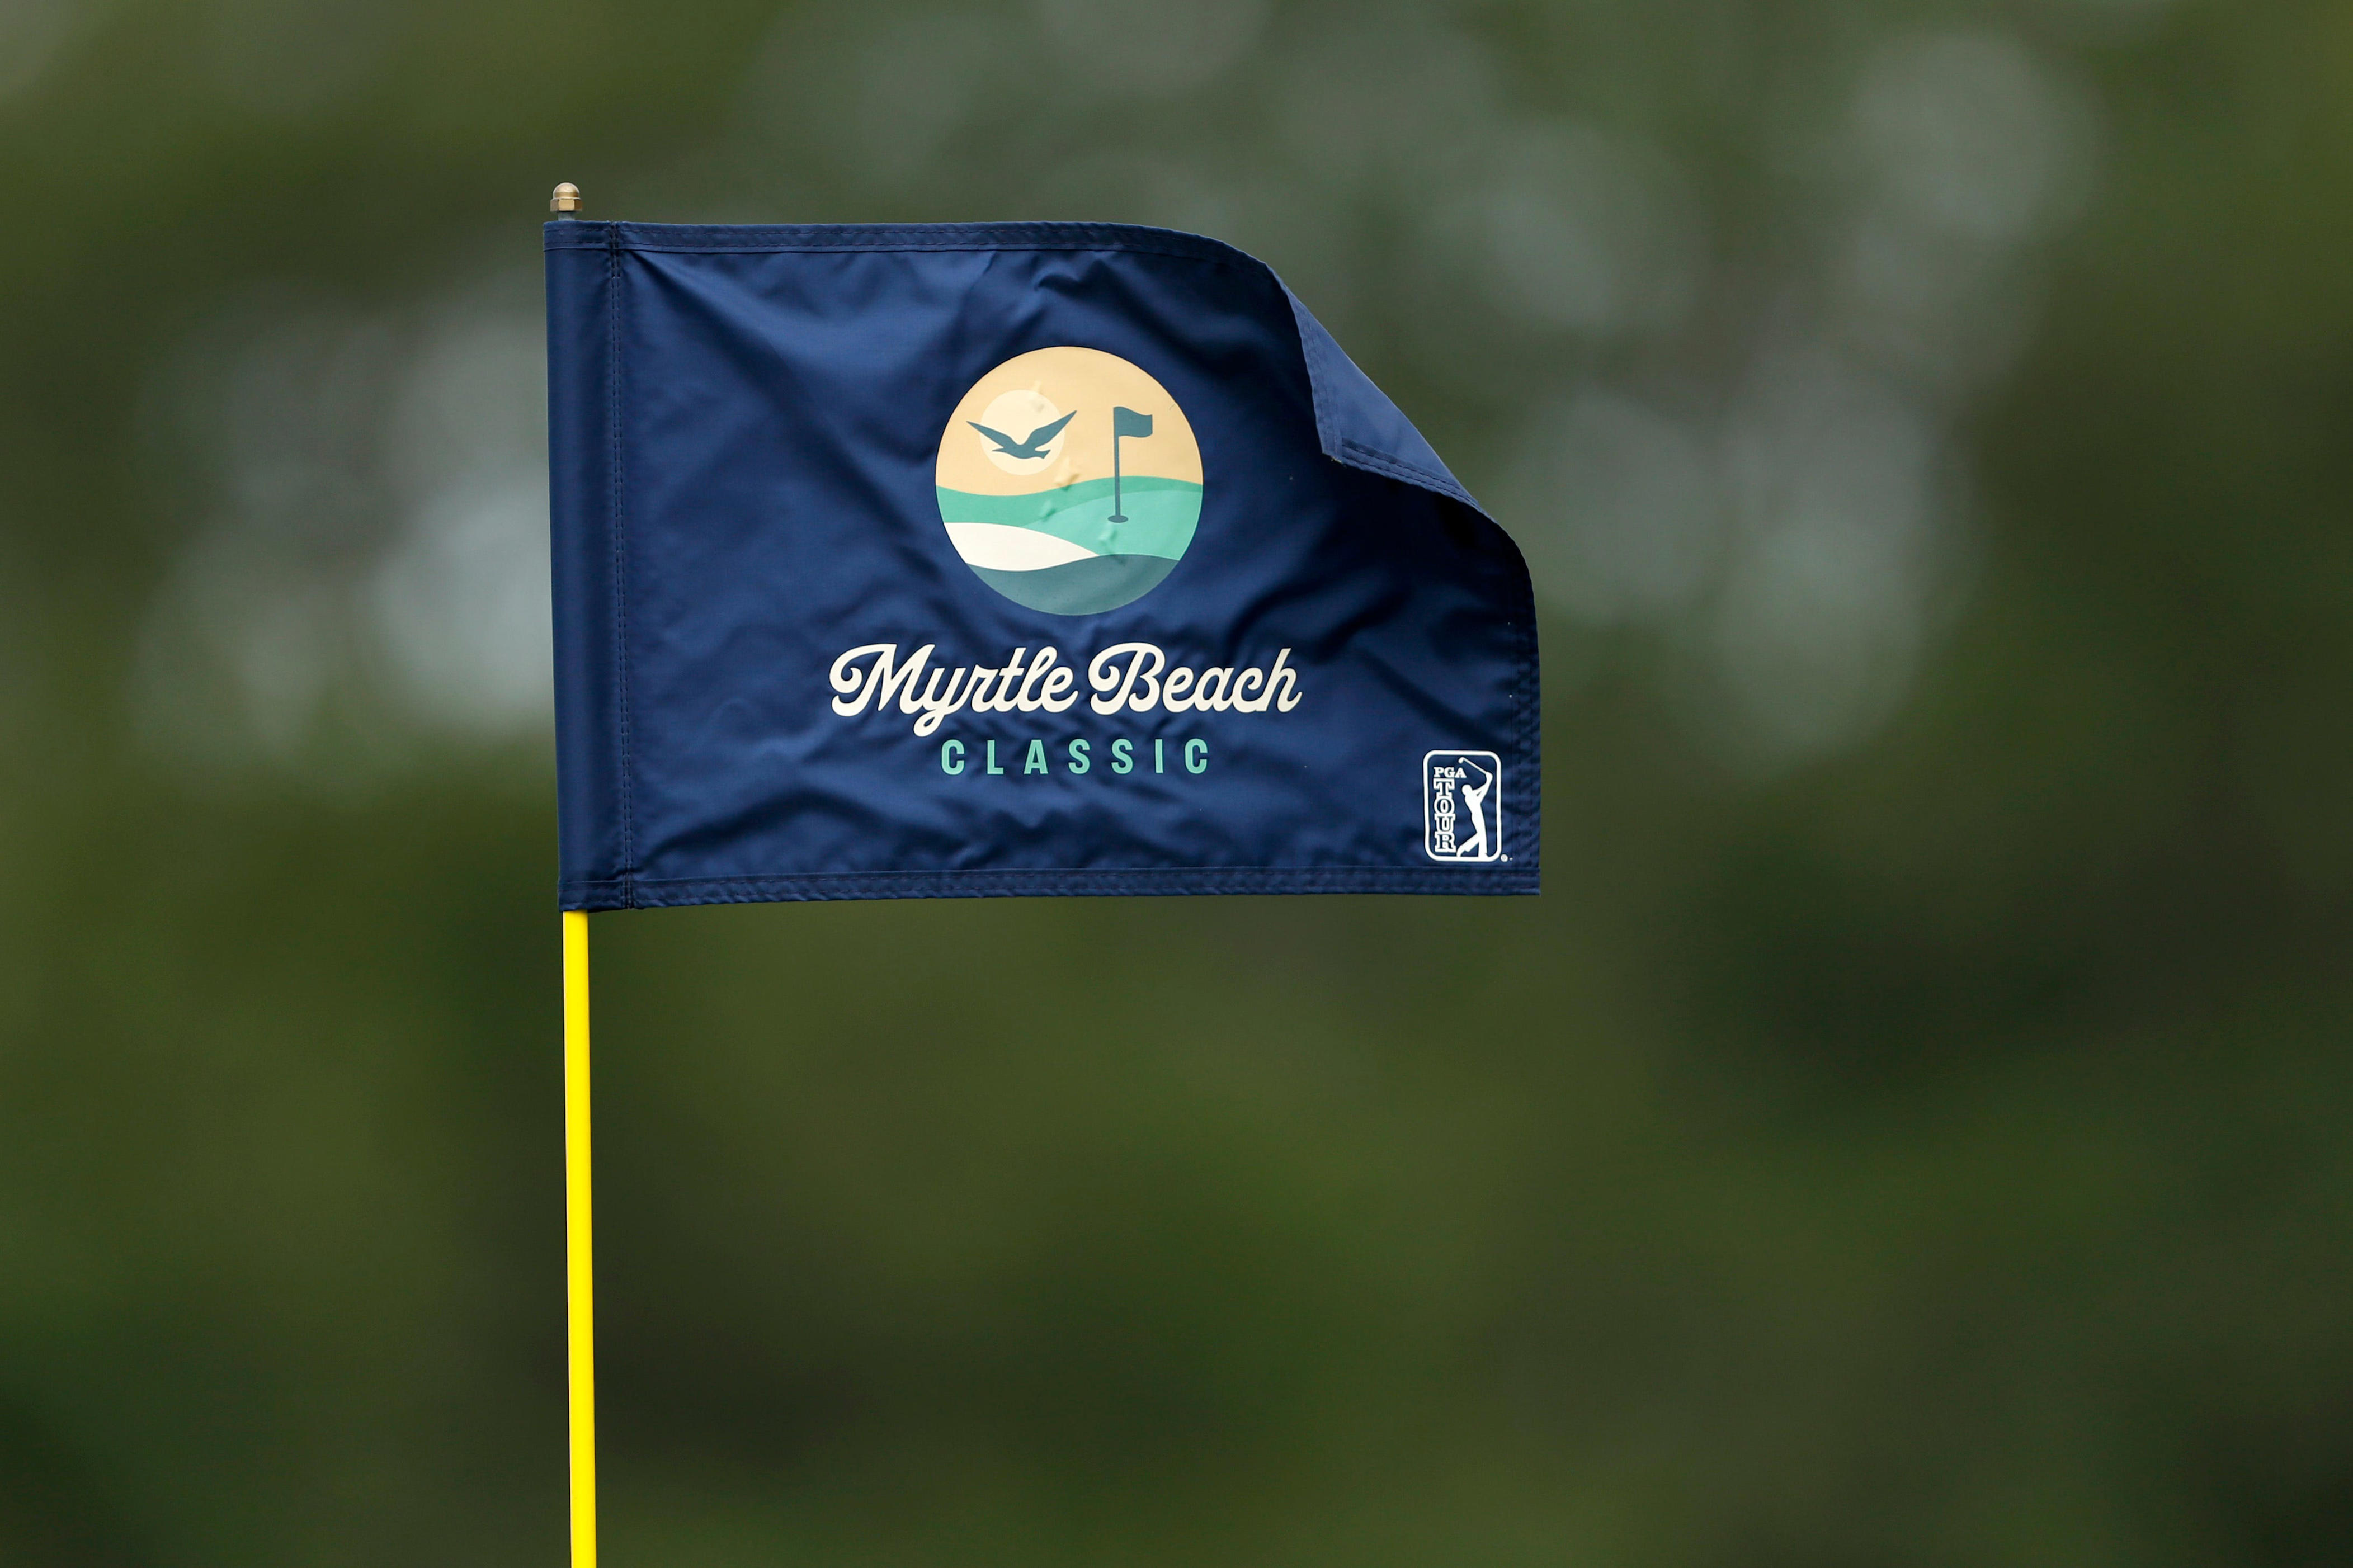 under-the-radar myrtle beach classic debuts on pga tour with beau hossler, robert macintyre tied for lead